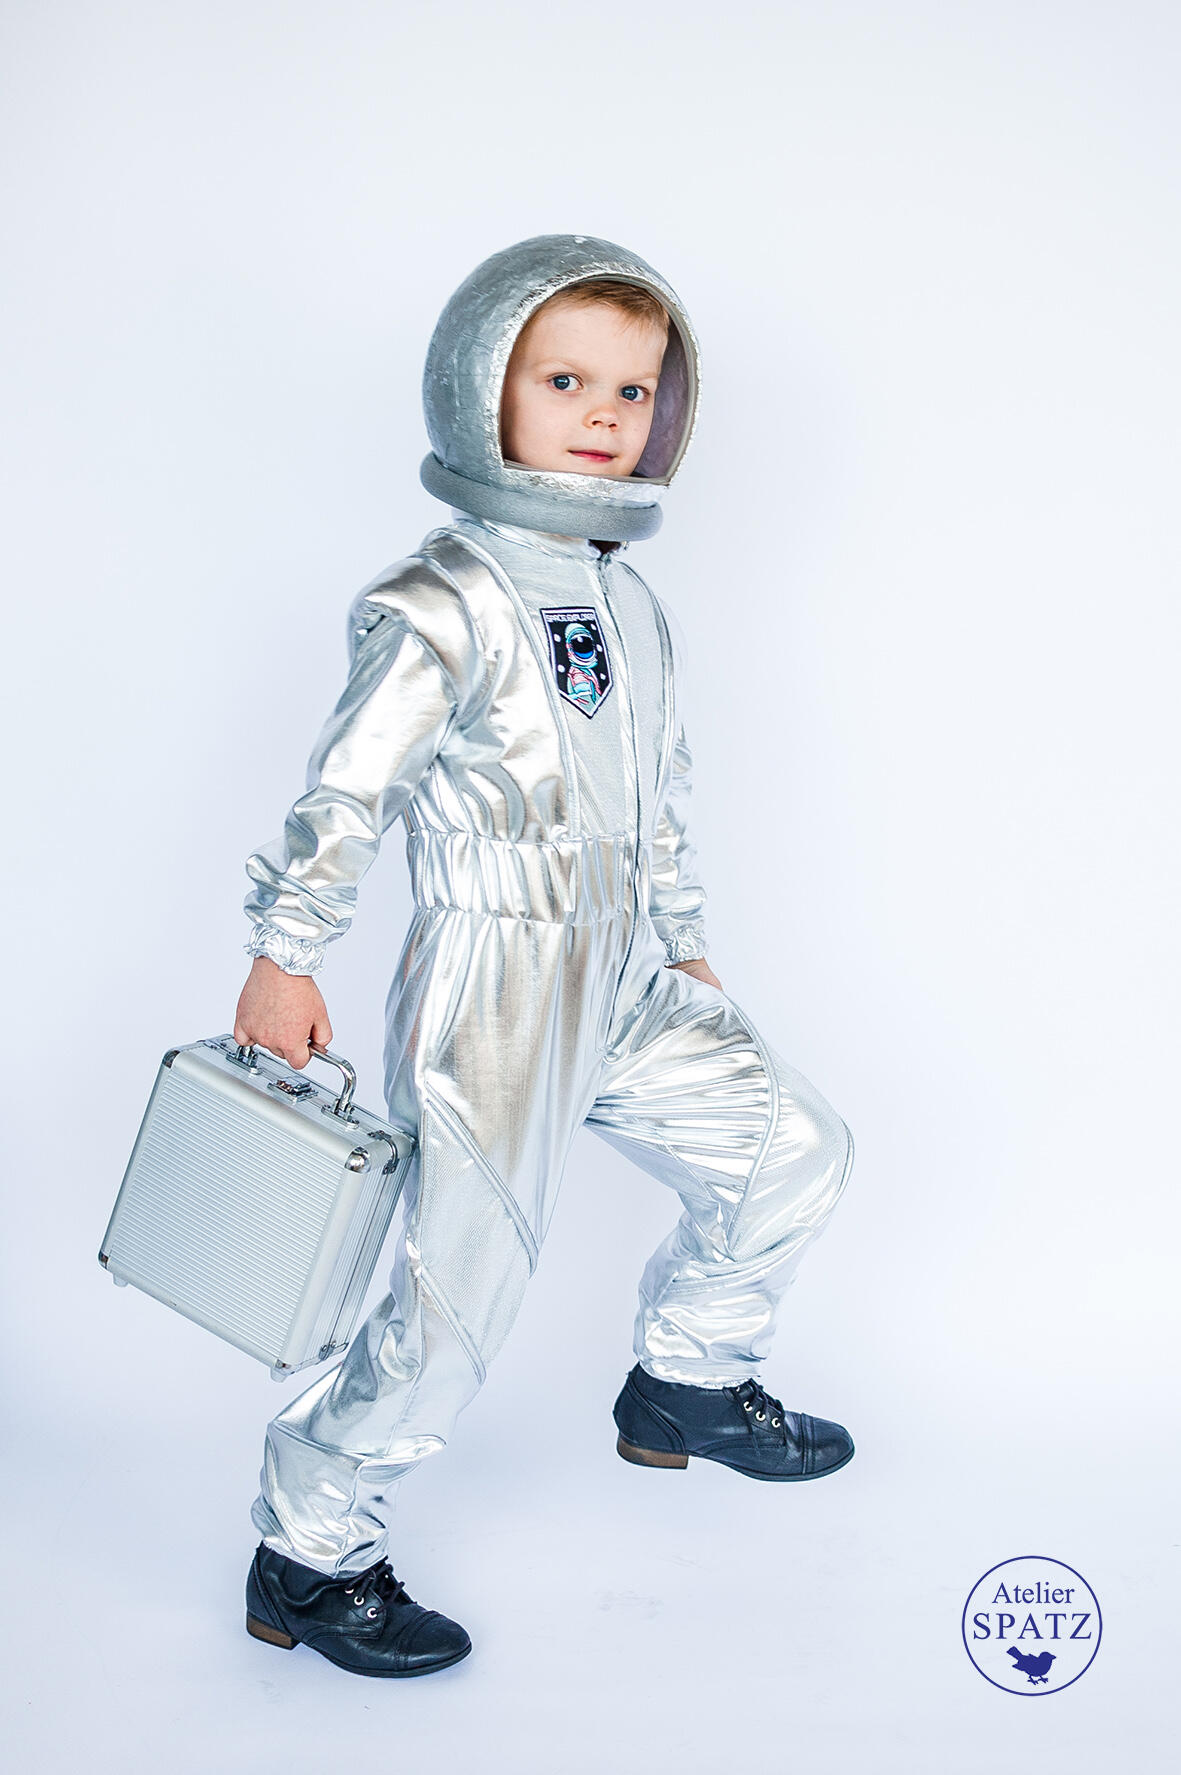 Astronaut suit as carnival disguise for children 